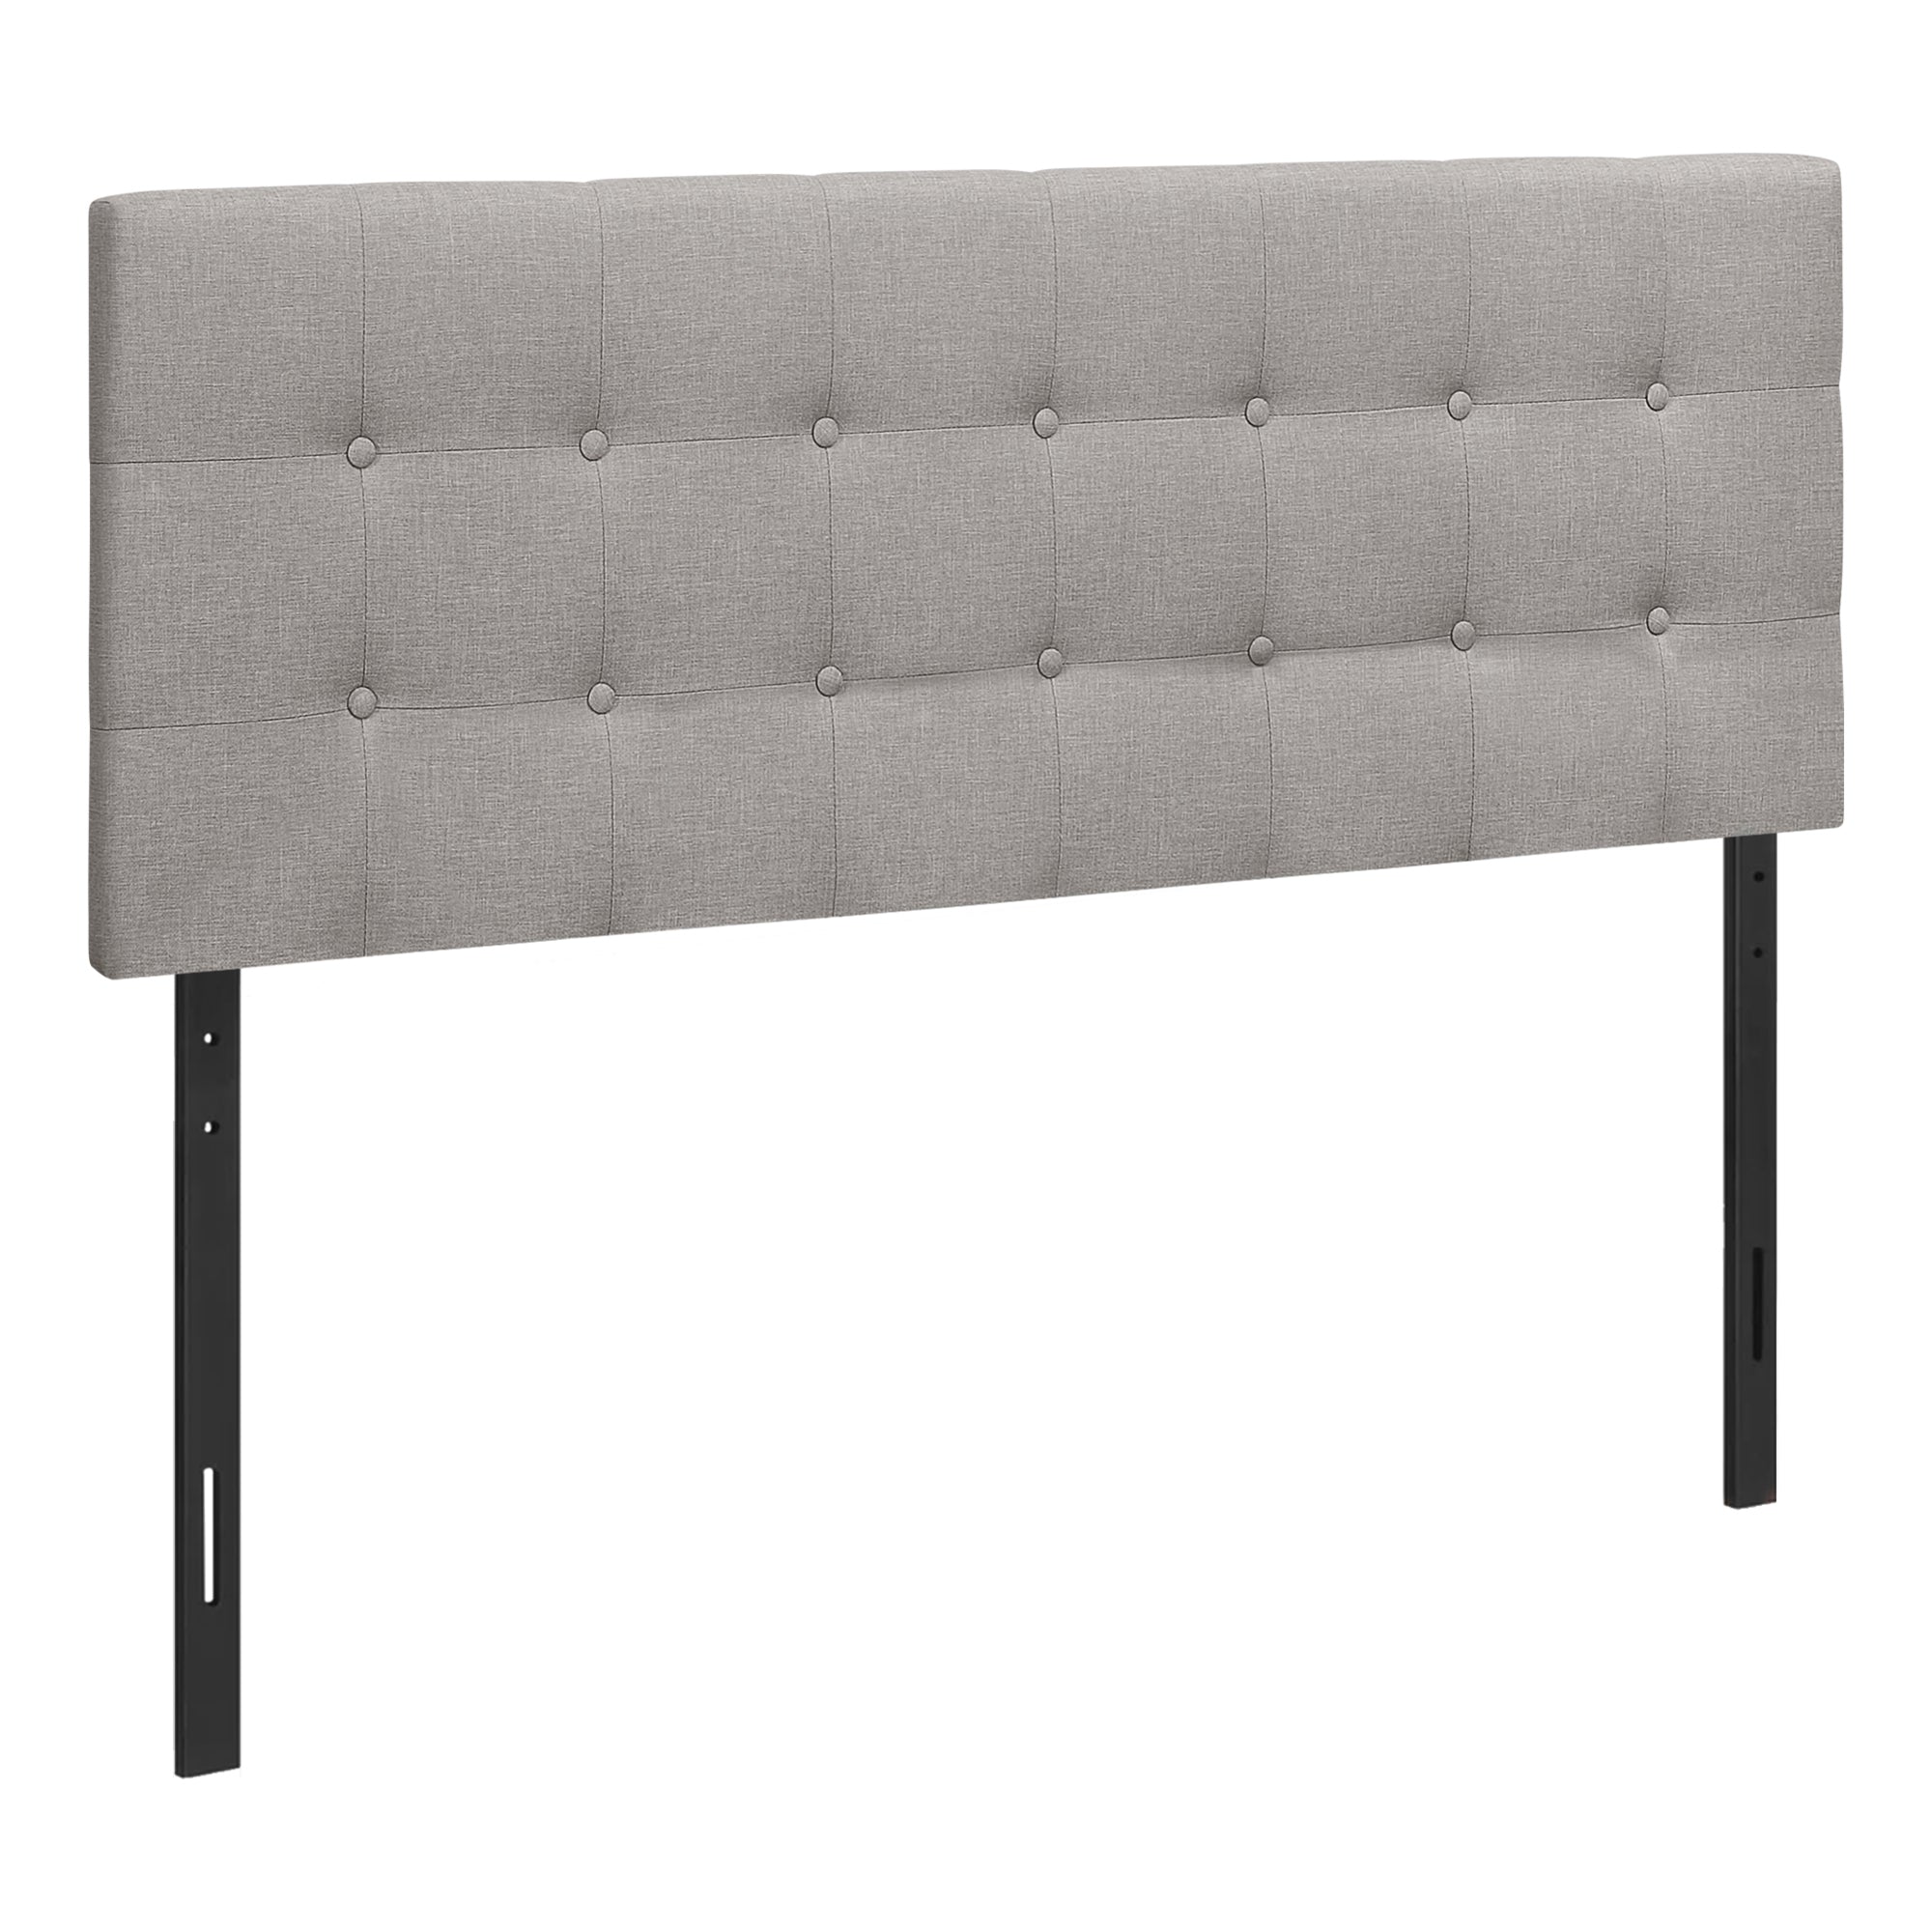 MN-436003Q    Headboard, Bedroom, Queen Size, Upholstered, Leather Look, Wooden Frame, Grey, Black, Contemporary, Modern